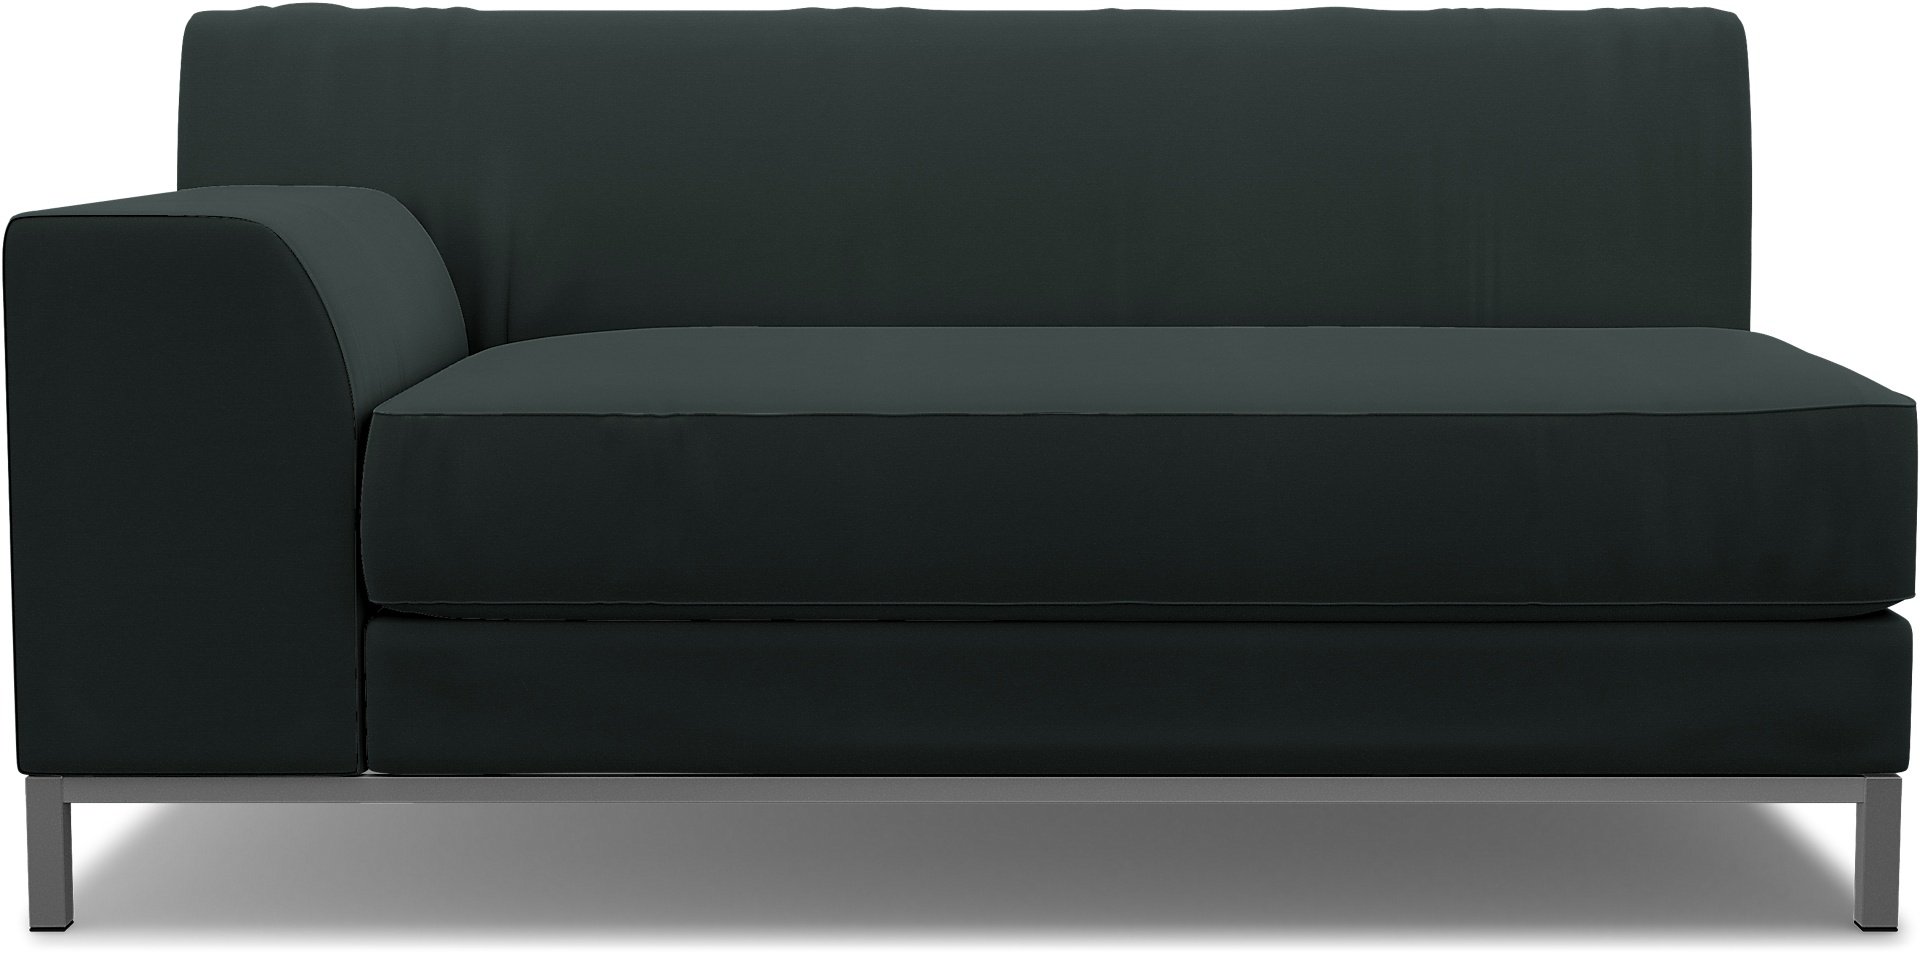 IKEA - Kramfors 2 Seater Sofa with Left Arm Cover, Graphite Grey, Cotton - Bemz